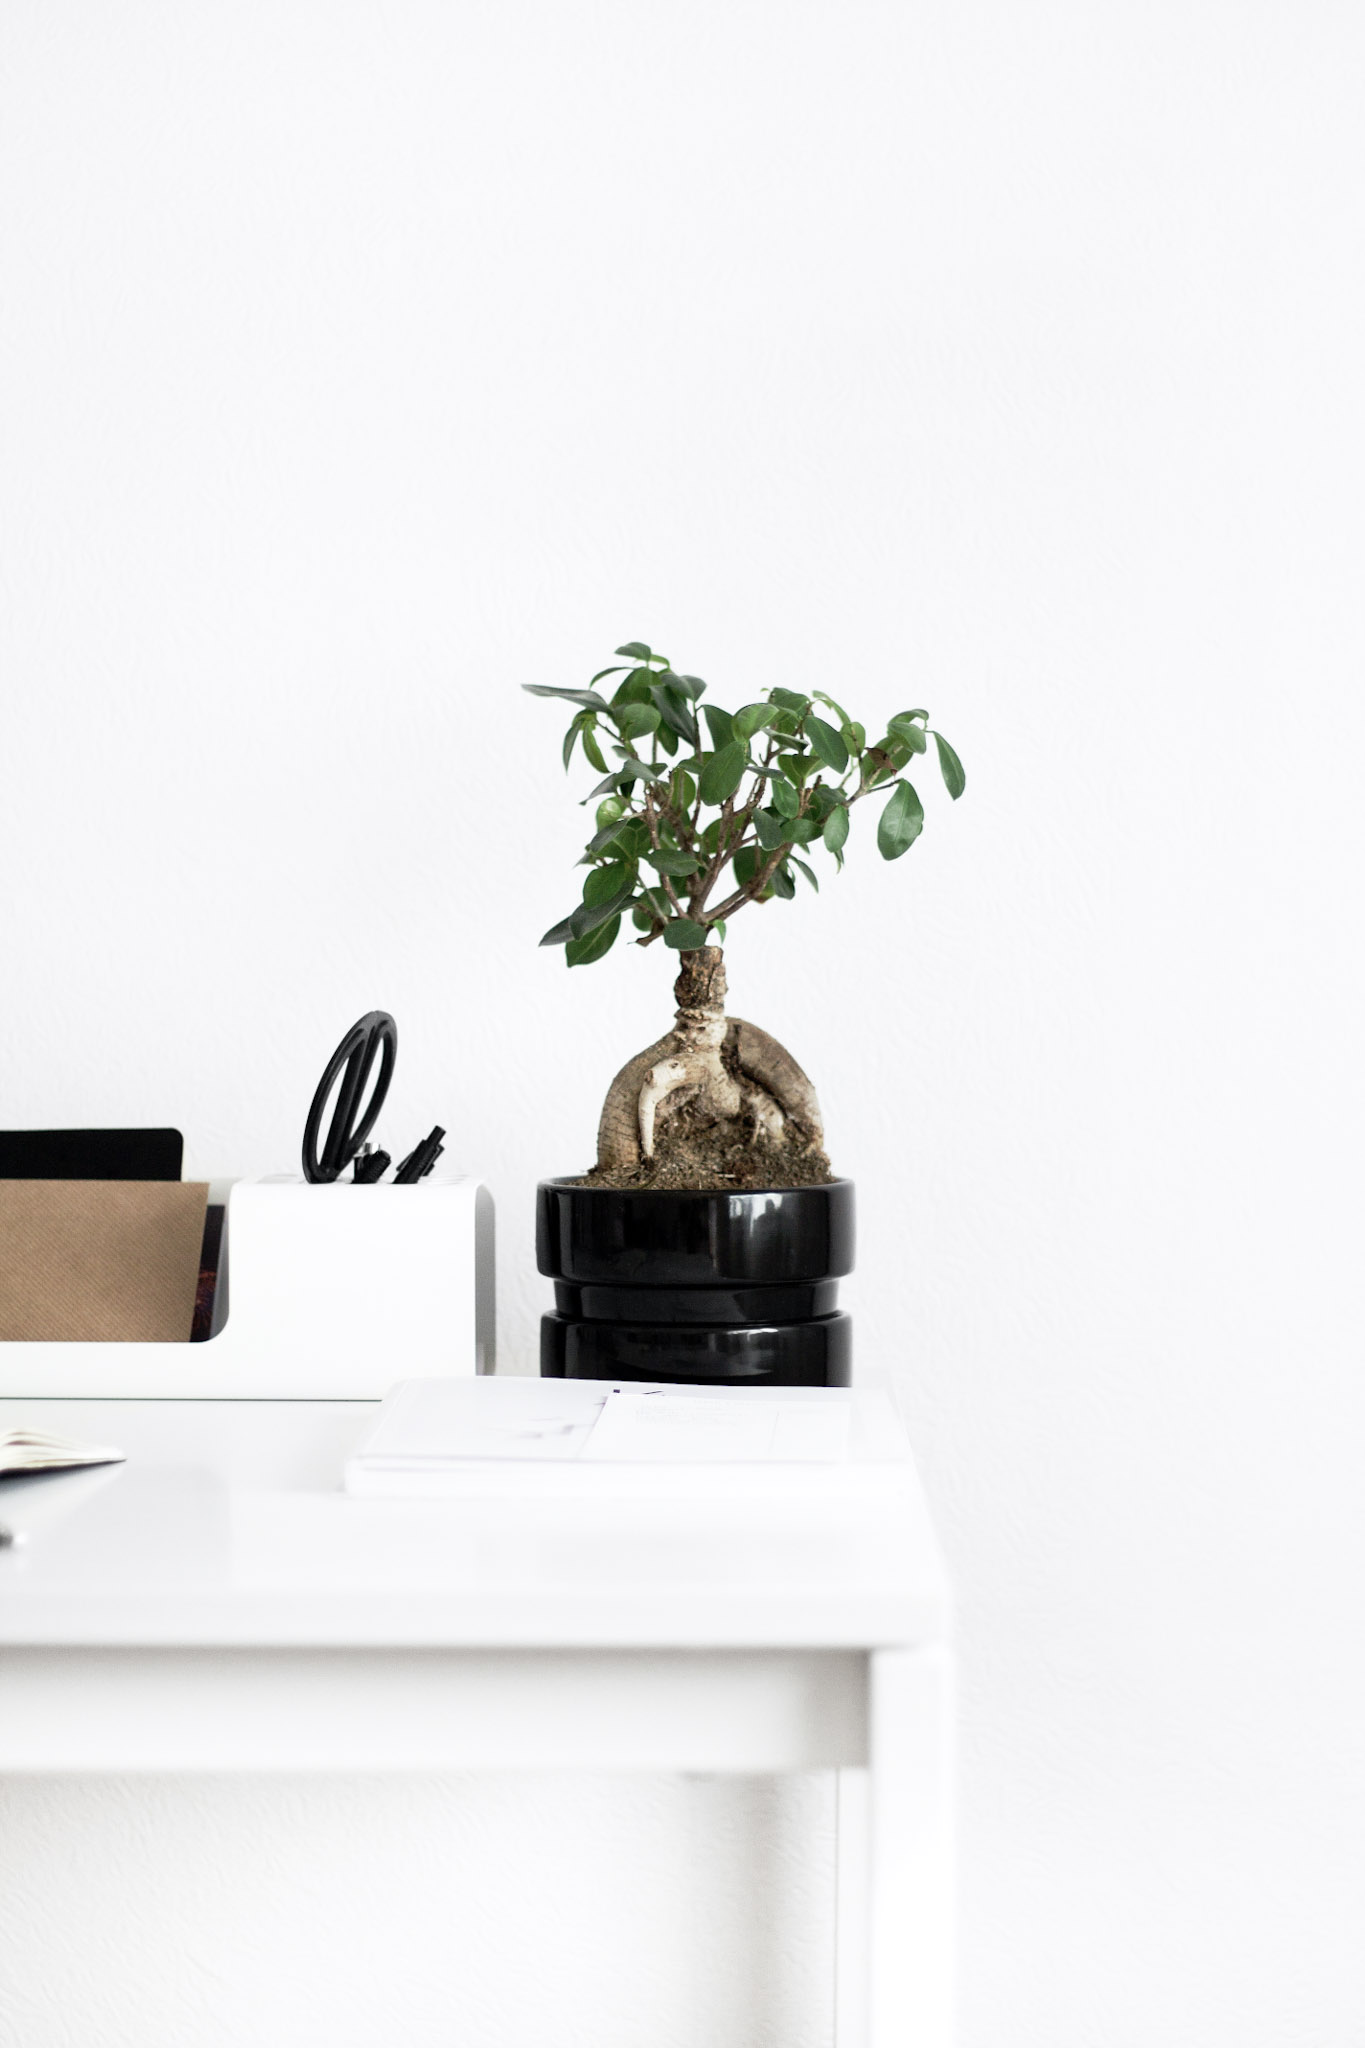 A beautiful side table in a bedroom holds a plant and other items. This article covers decorating tips for your bedroom.